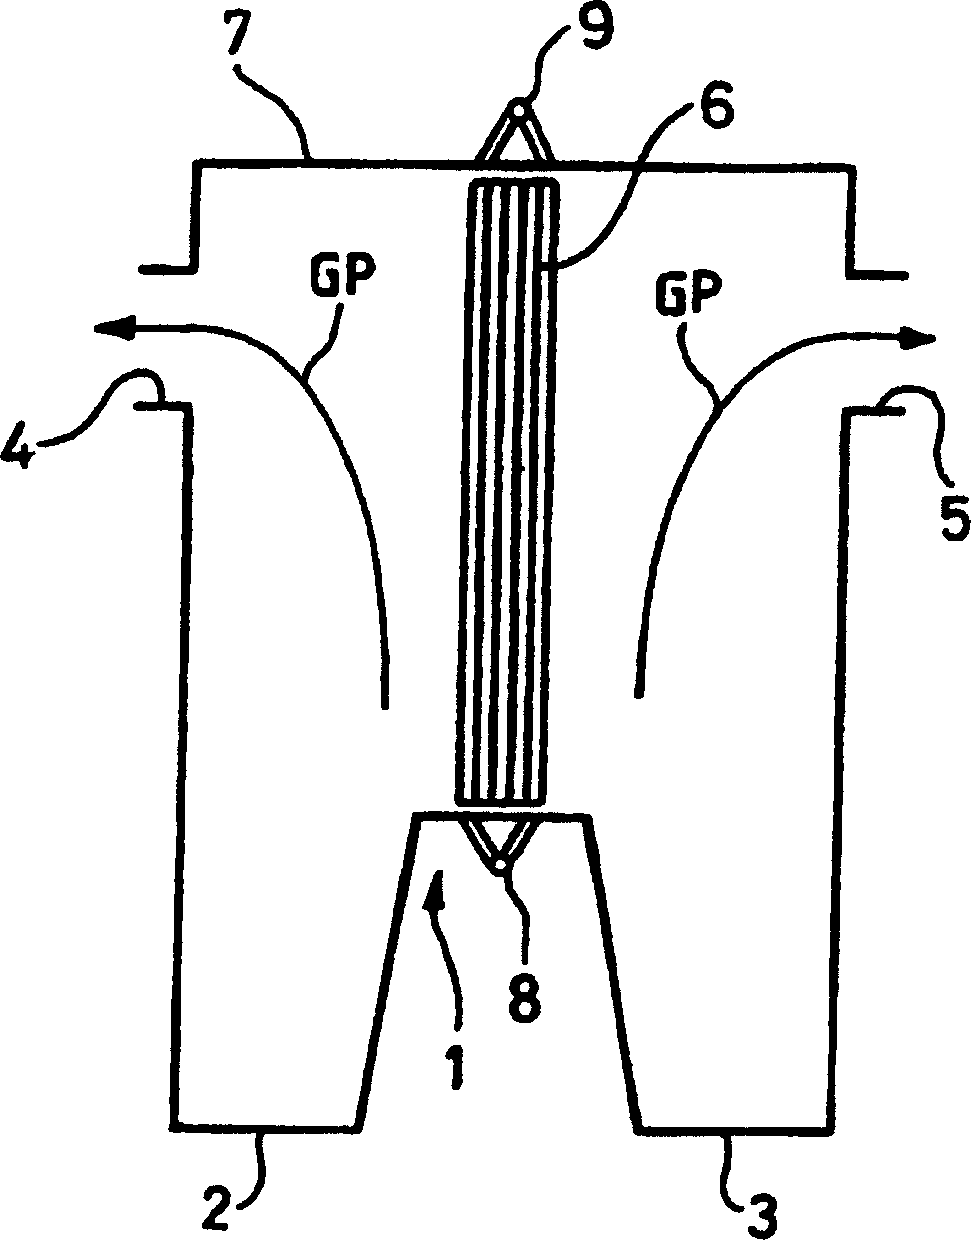 Fluidized bed boiler furnace comprising two hearths separated by an inside leg area